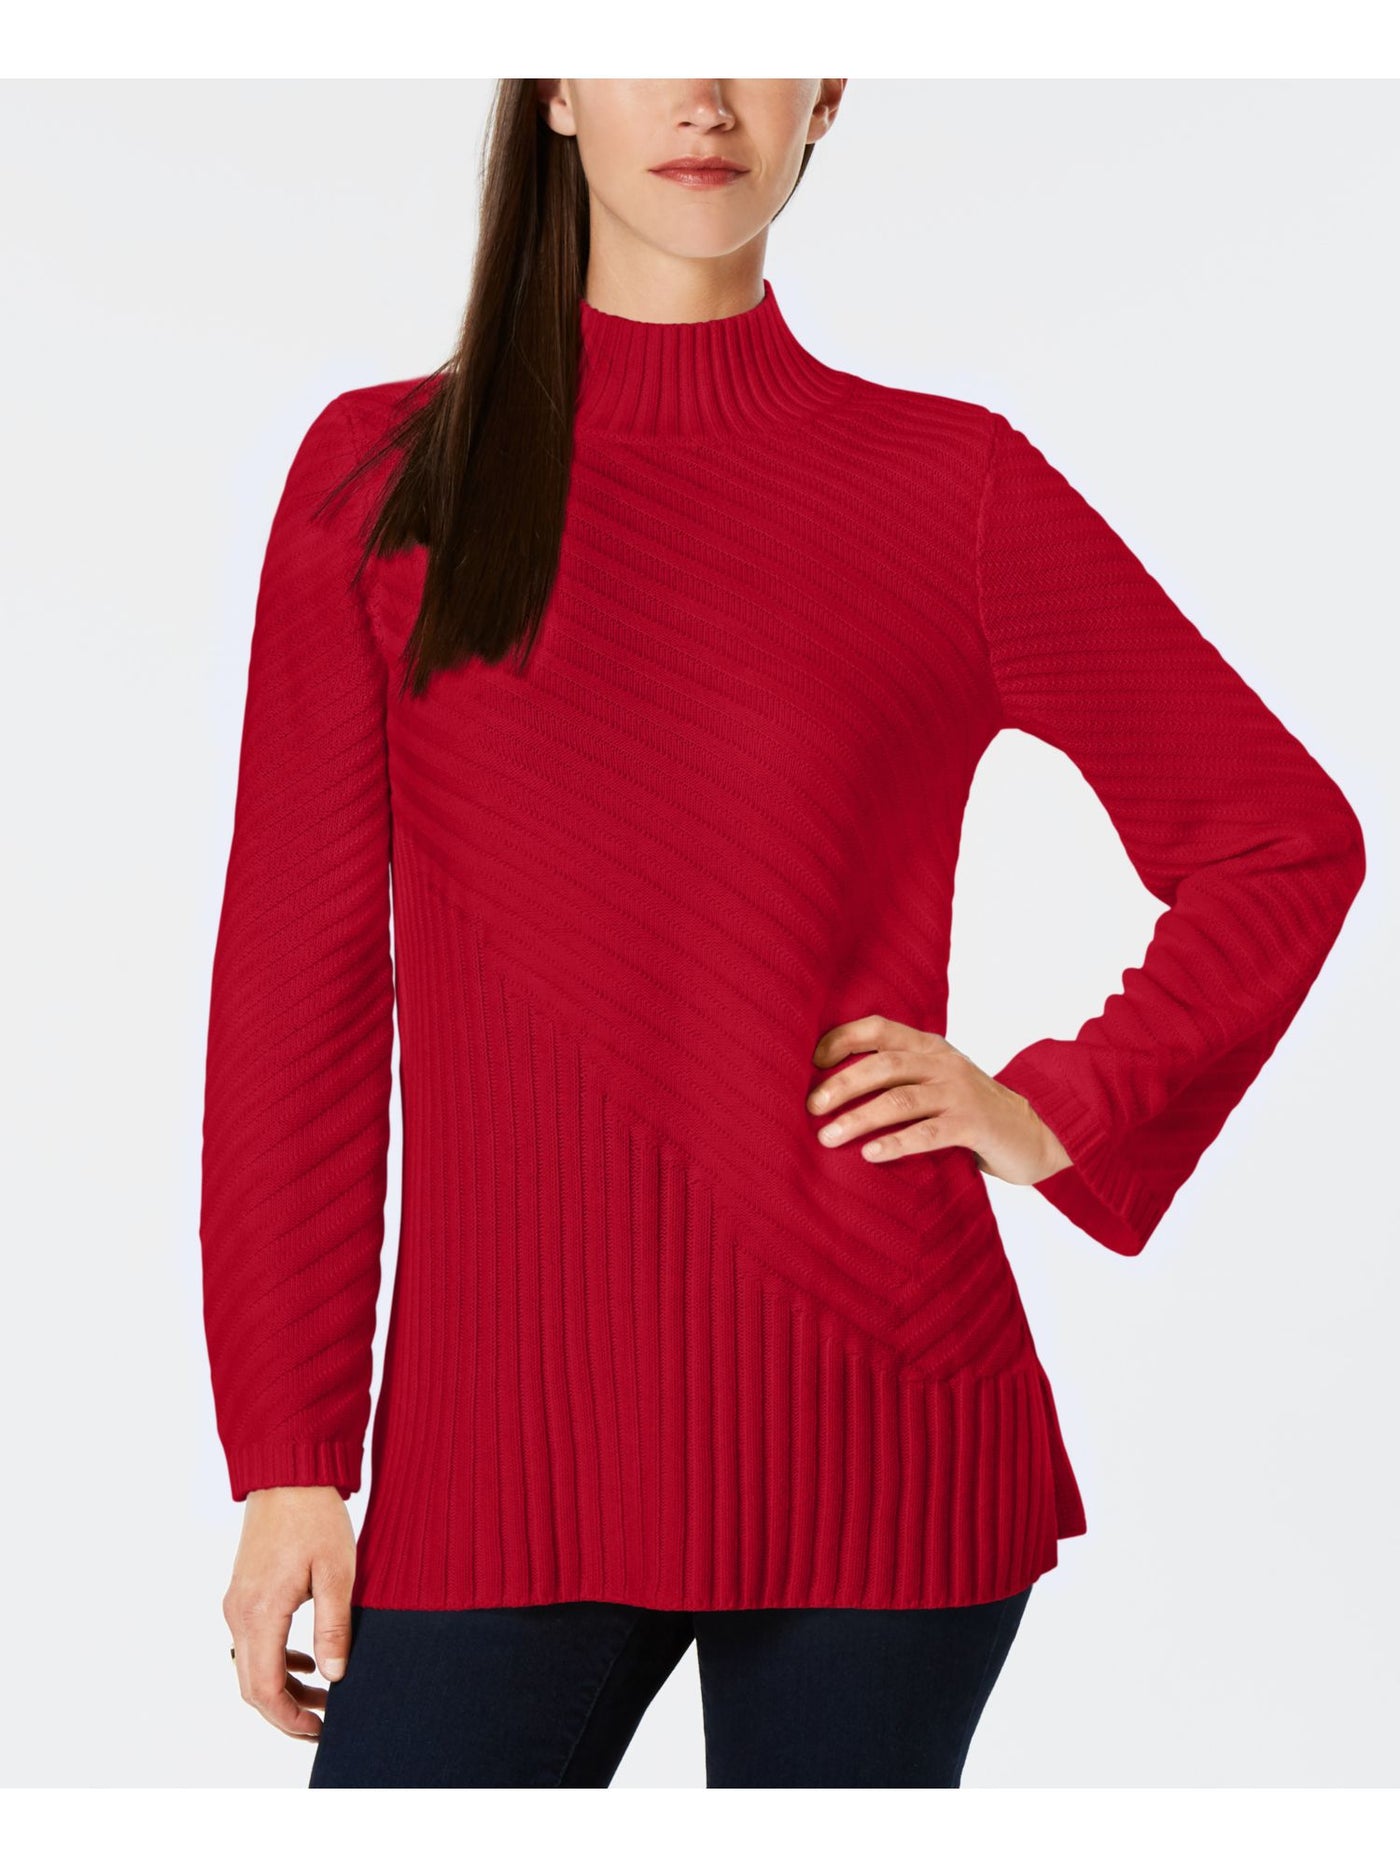 CHARTER CLUB Womens Red Ribbed Textured Long Sleeve Mock Neck Sweater XS